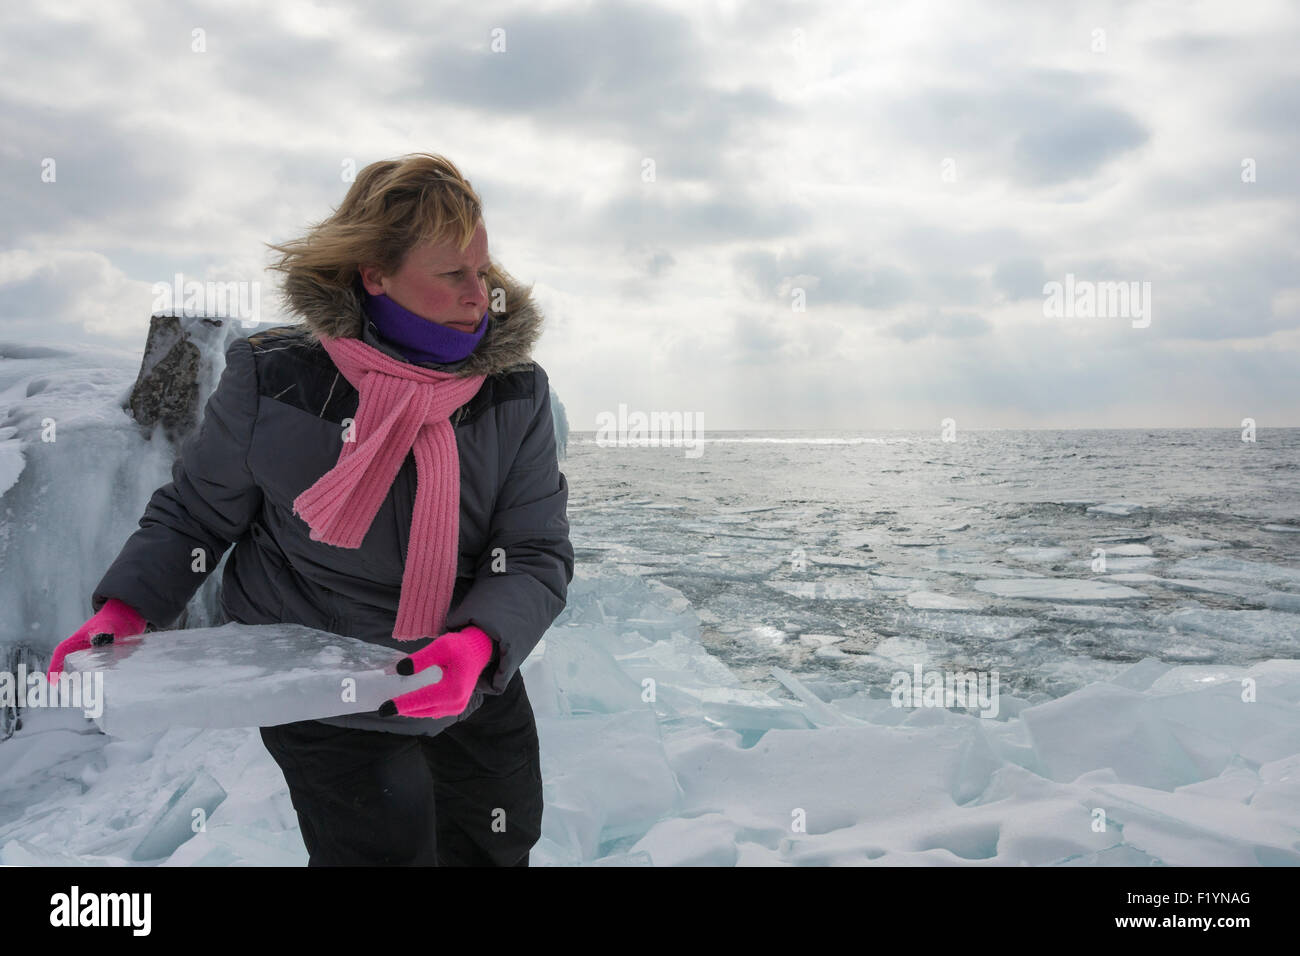 Blond Caucasian woman in her 40s wearing a winter coat and pink scarf prepares to throw a large chunk of plate ice on the shore Stock Photo